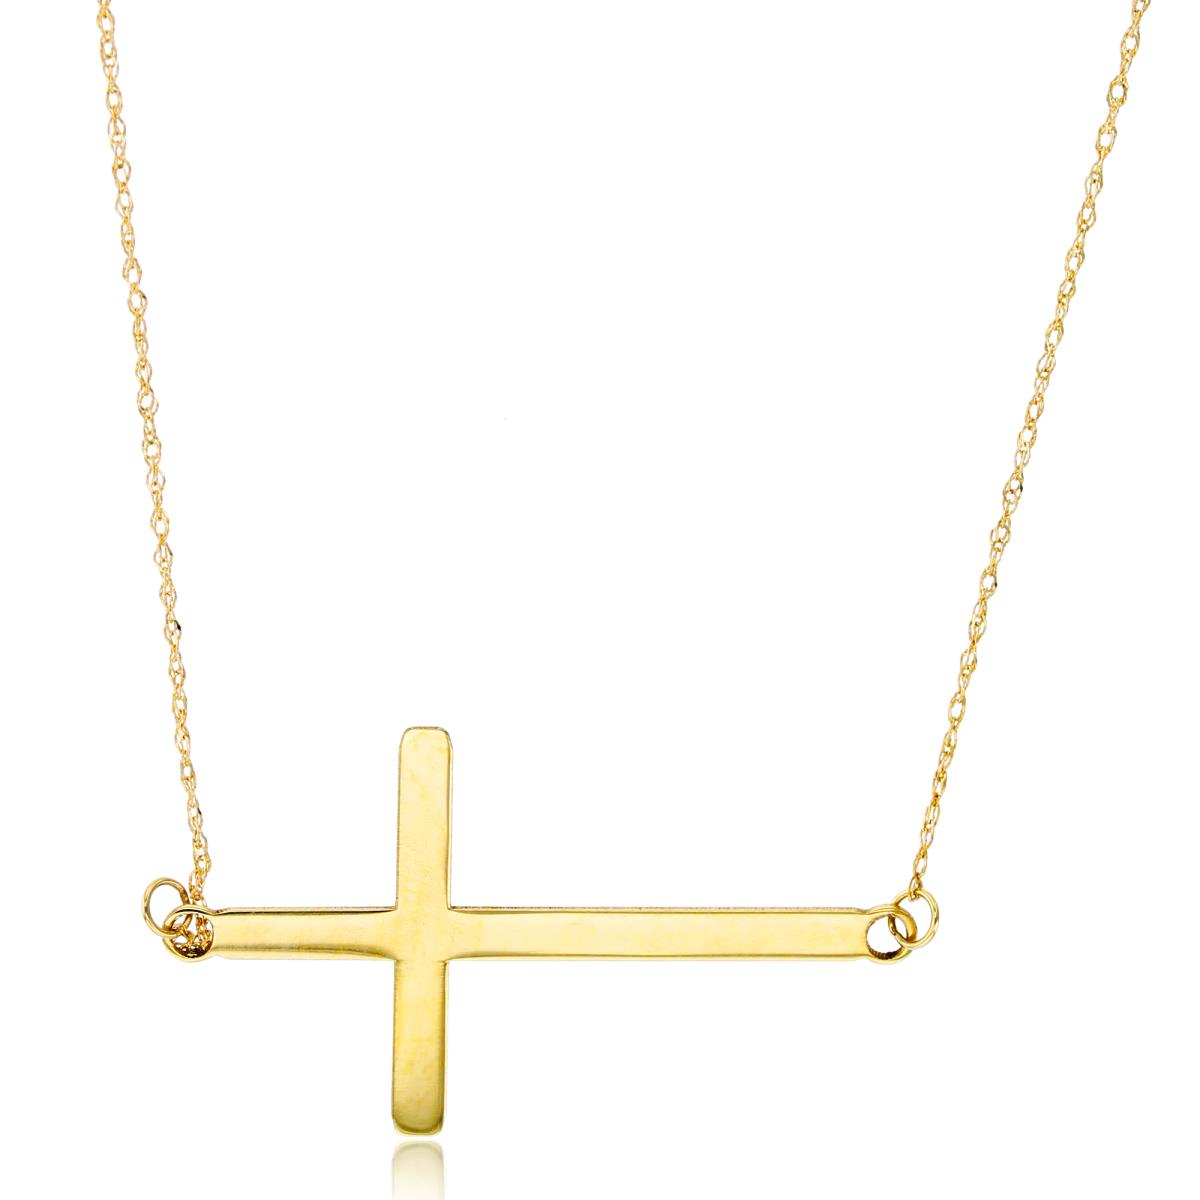 14K Yellow Gold Polished Sideways Cross 17" Rope Chain Necklace